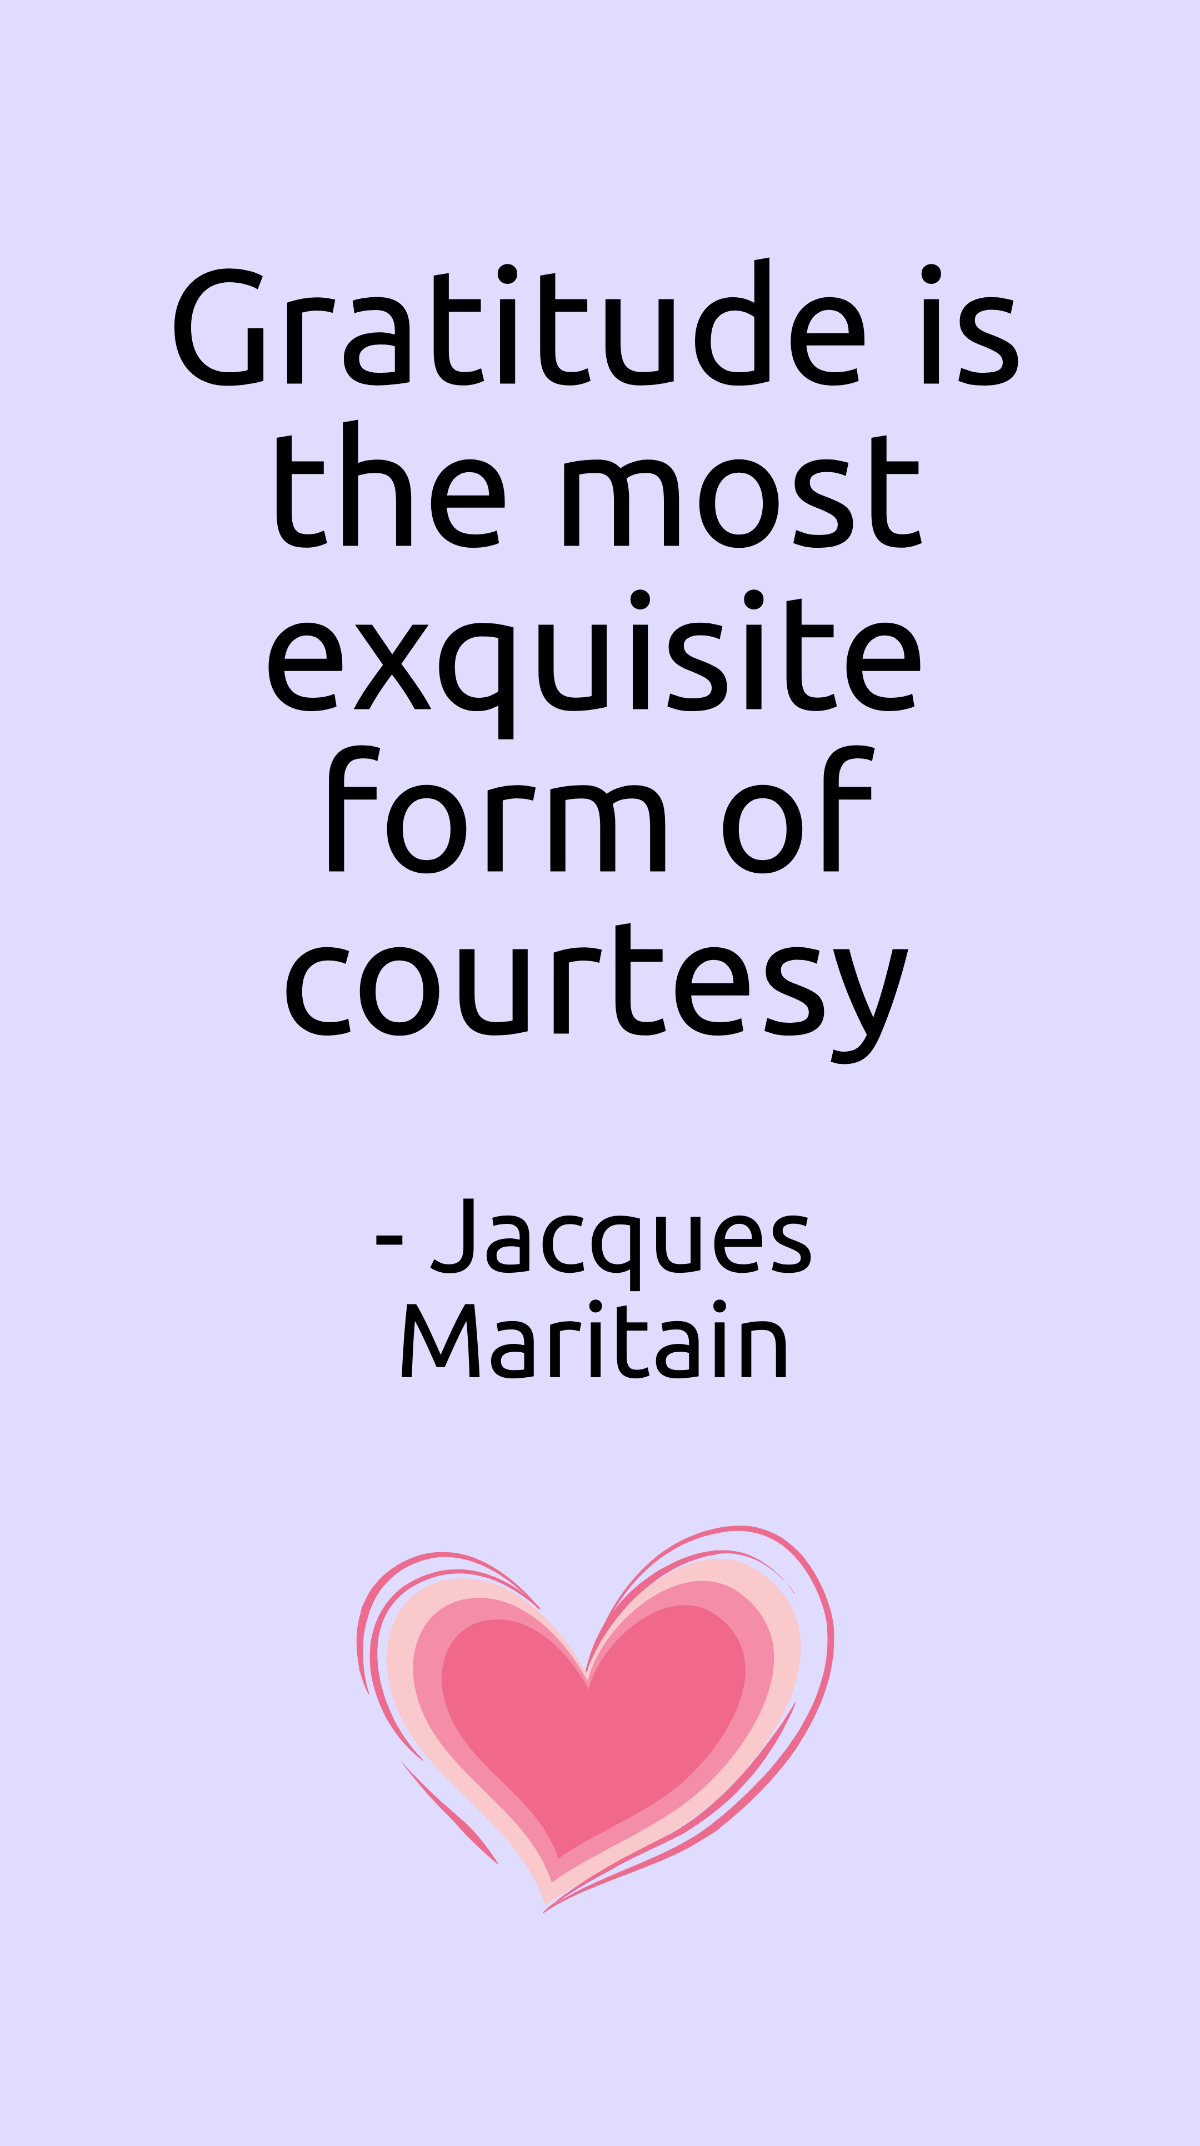 Jacques Maritain - Gratitude is the most exquisite form of courtesy Template